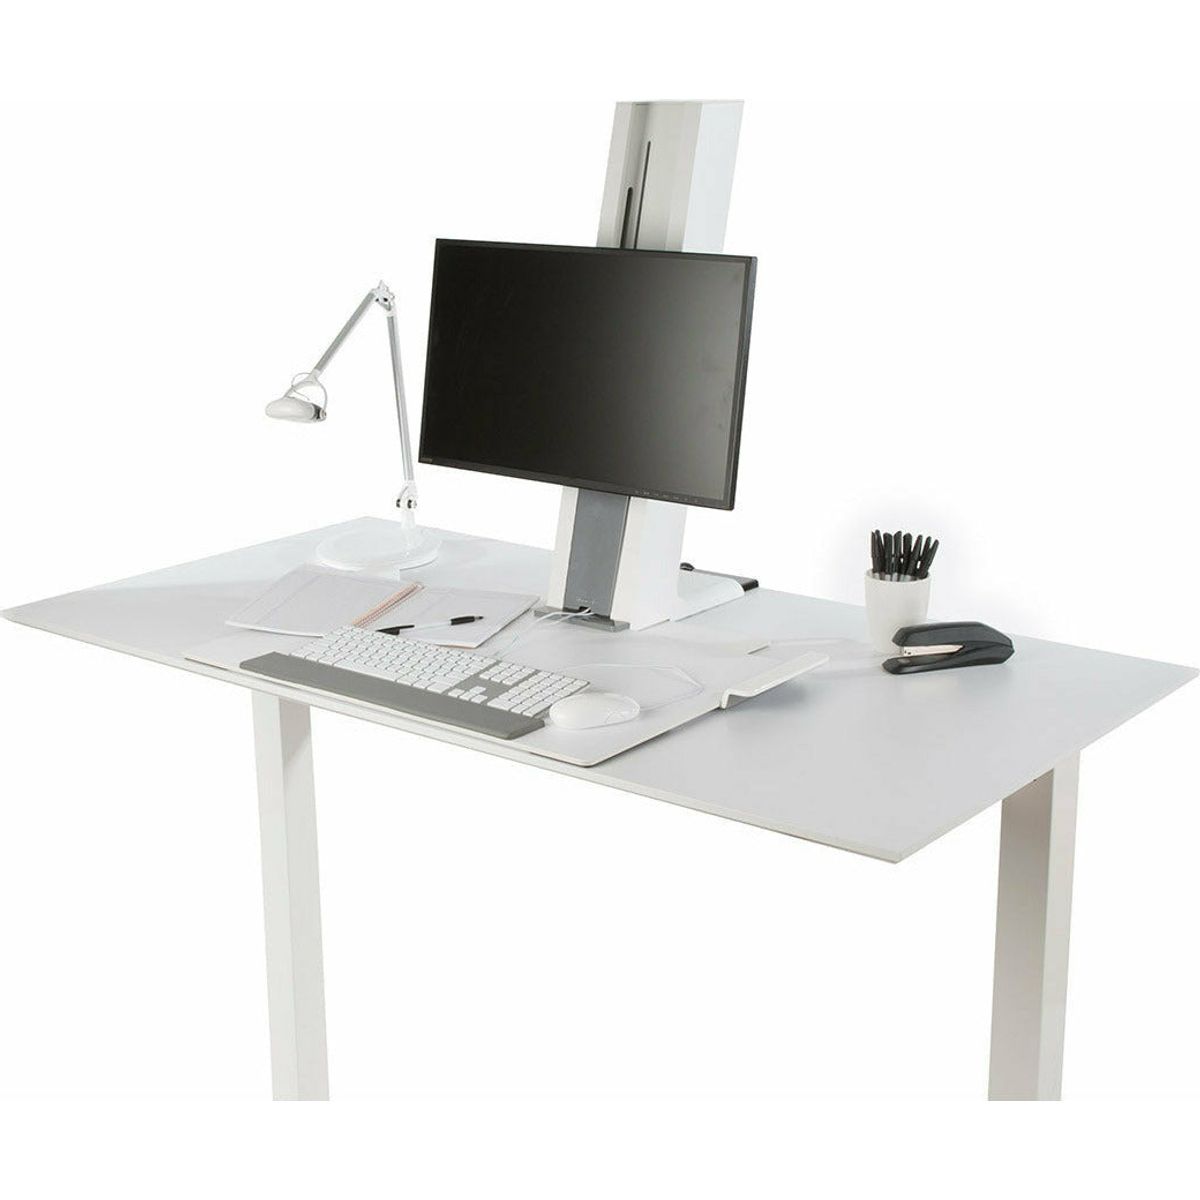 Humanscale Quickstand Single/Dual Workstation